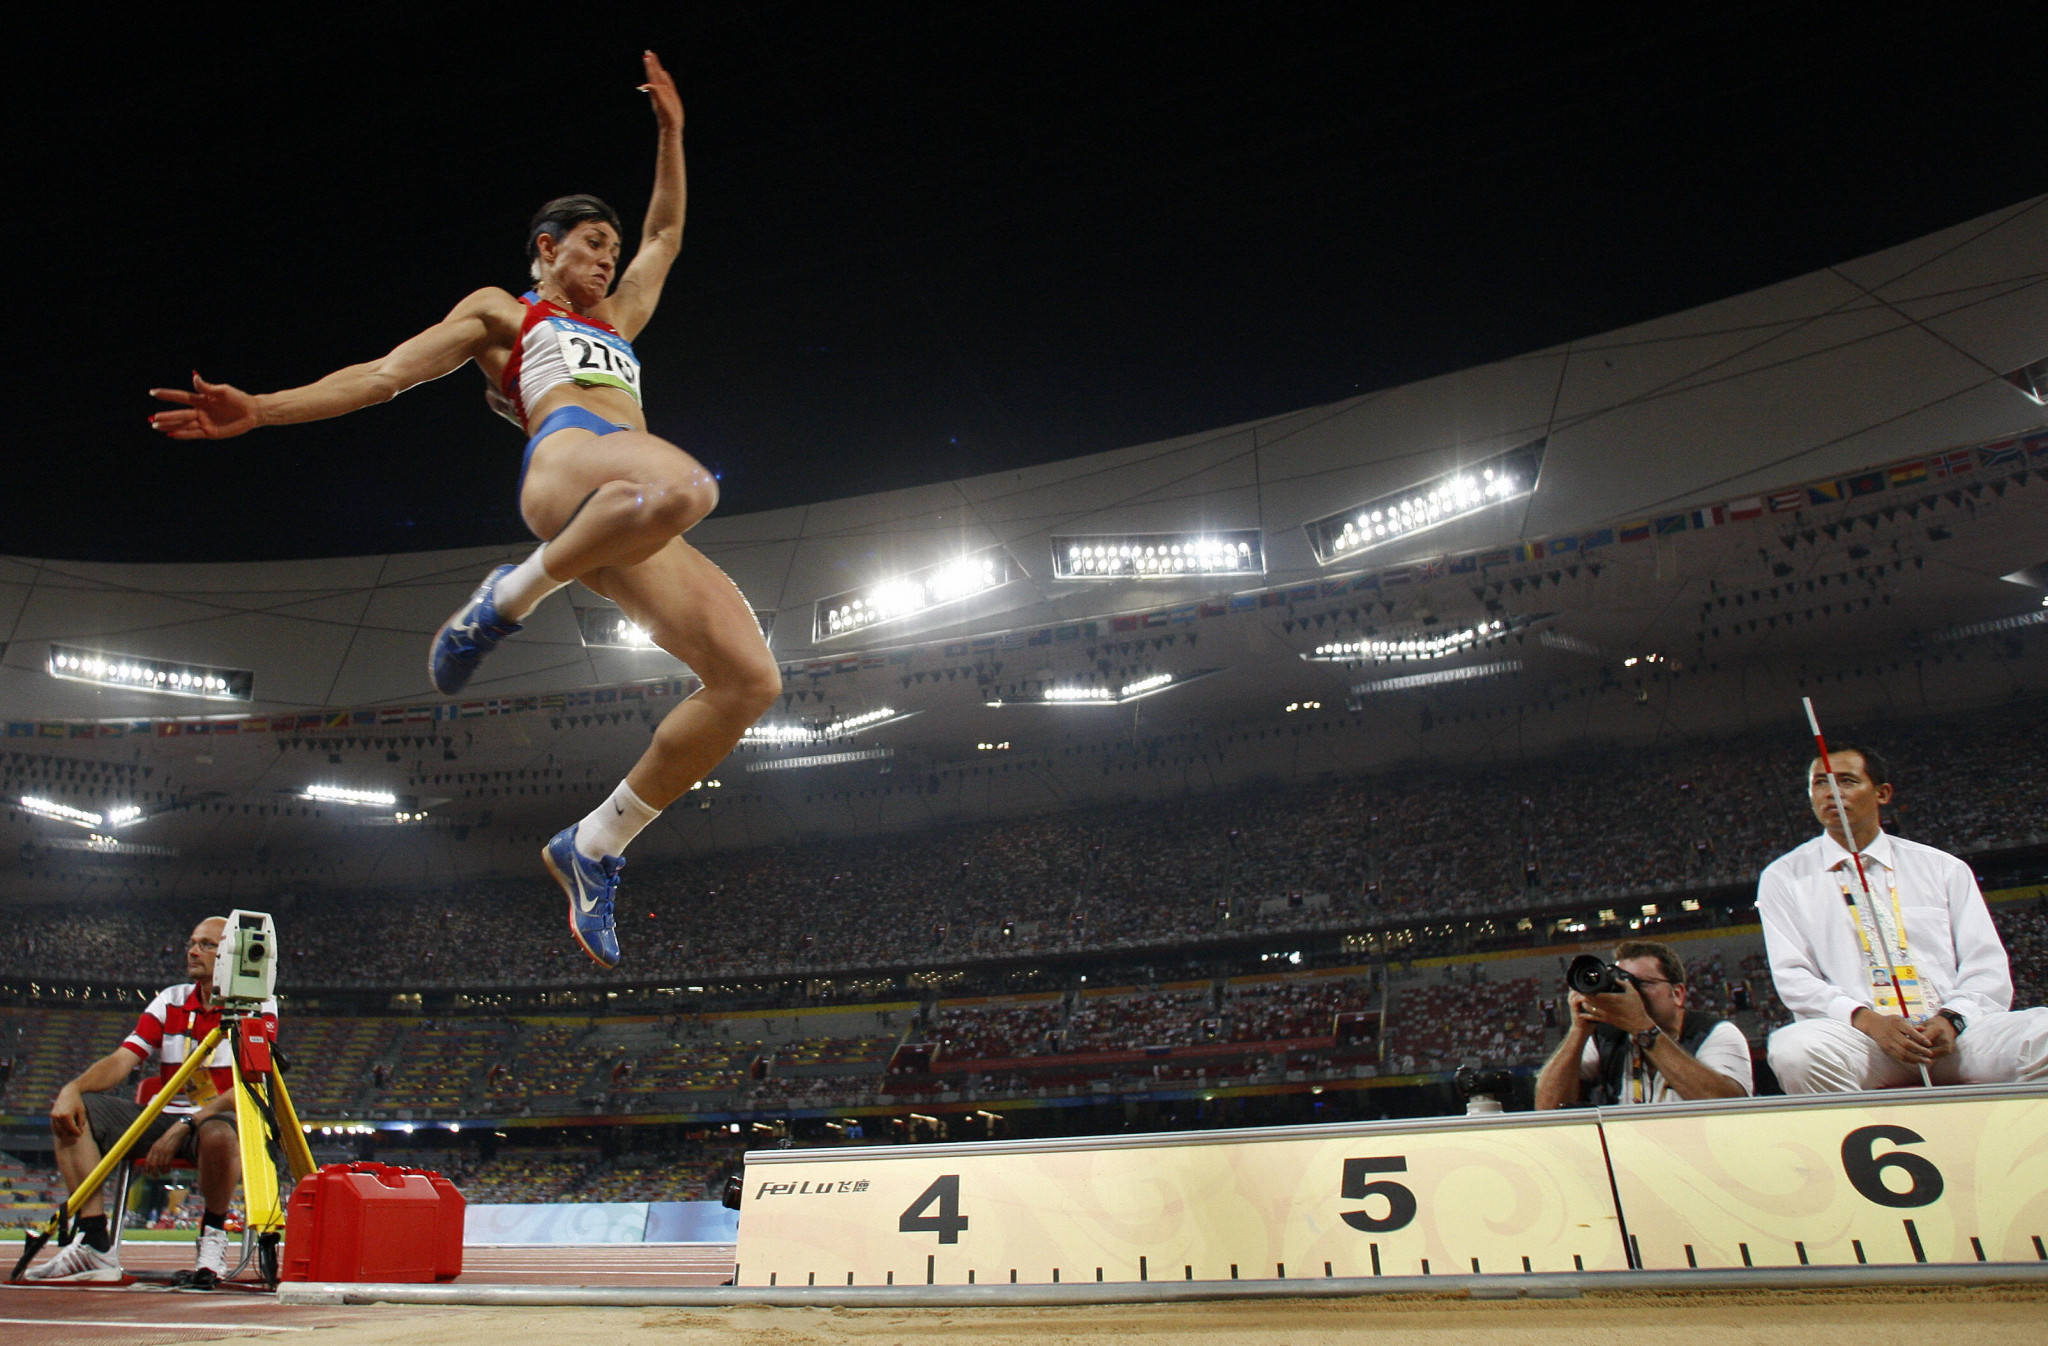 Tatyana Lebedeva will lose long jump and triple jump silver medals from Beijing 2008 ©Getty Images